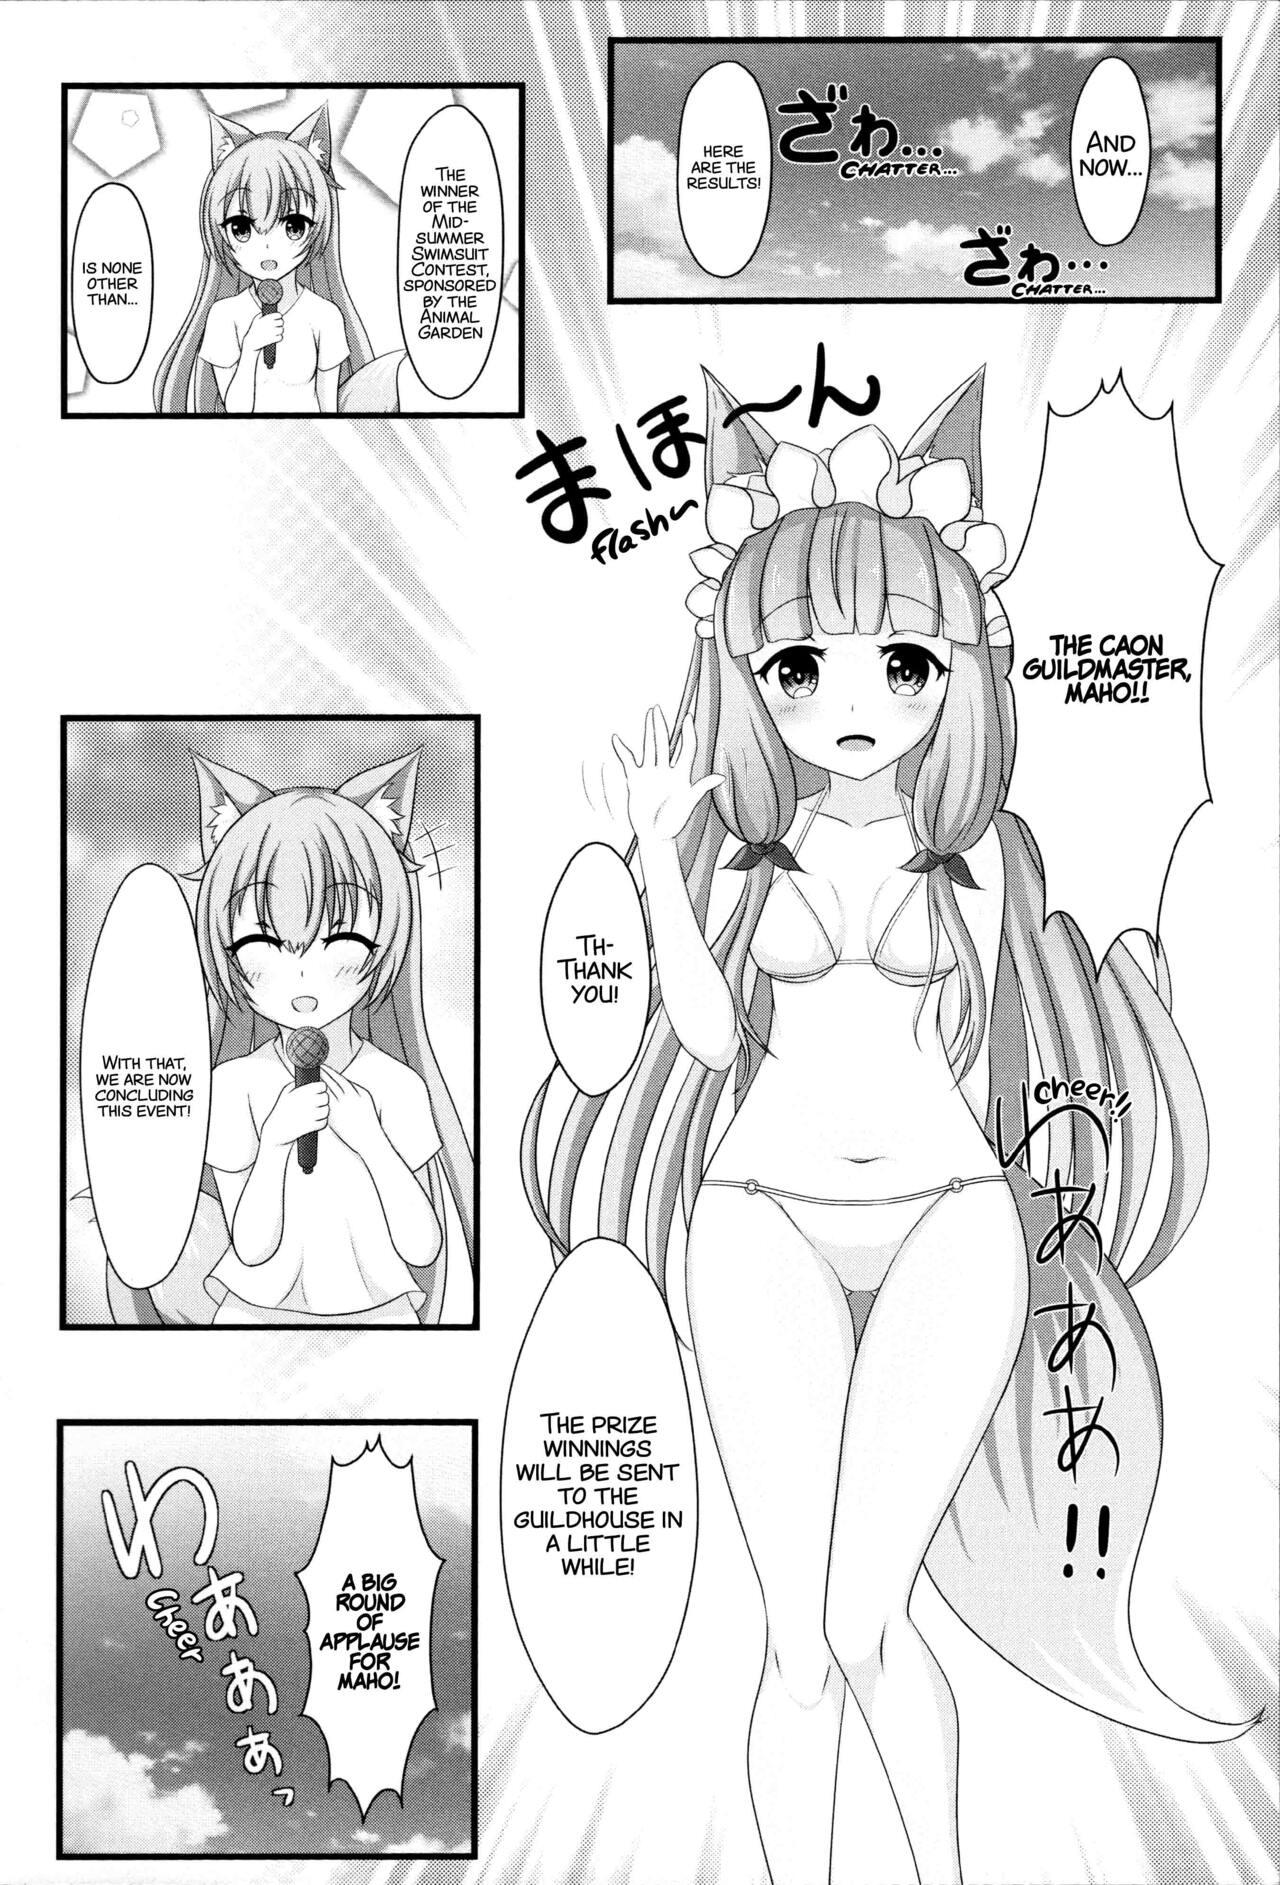 Beauty Maho Hime Connect! 2 - Princess connect Assfucking - Page 5